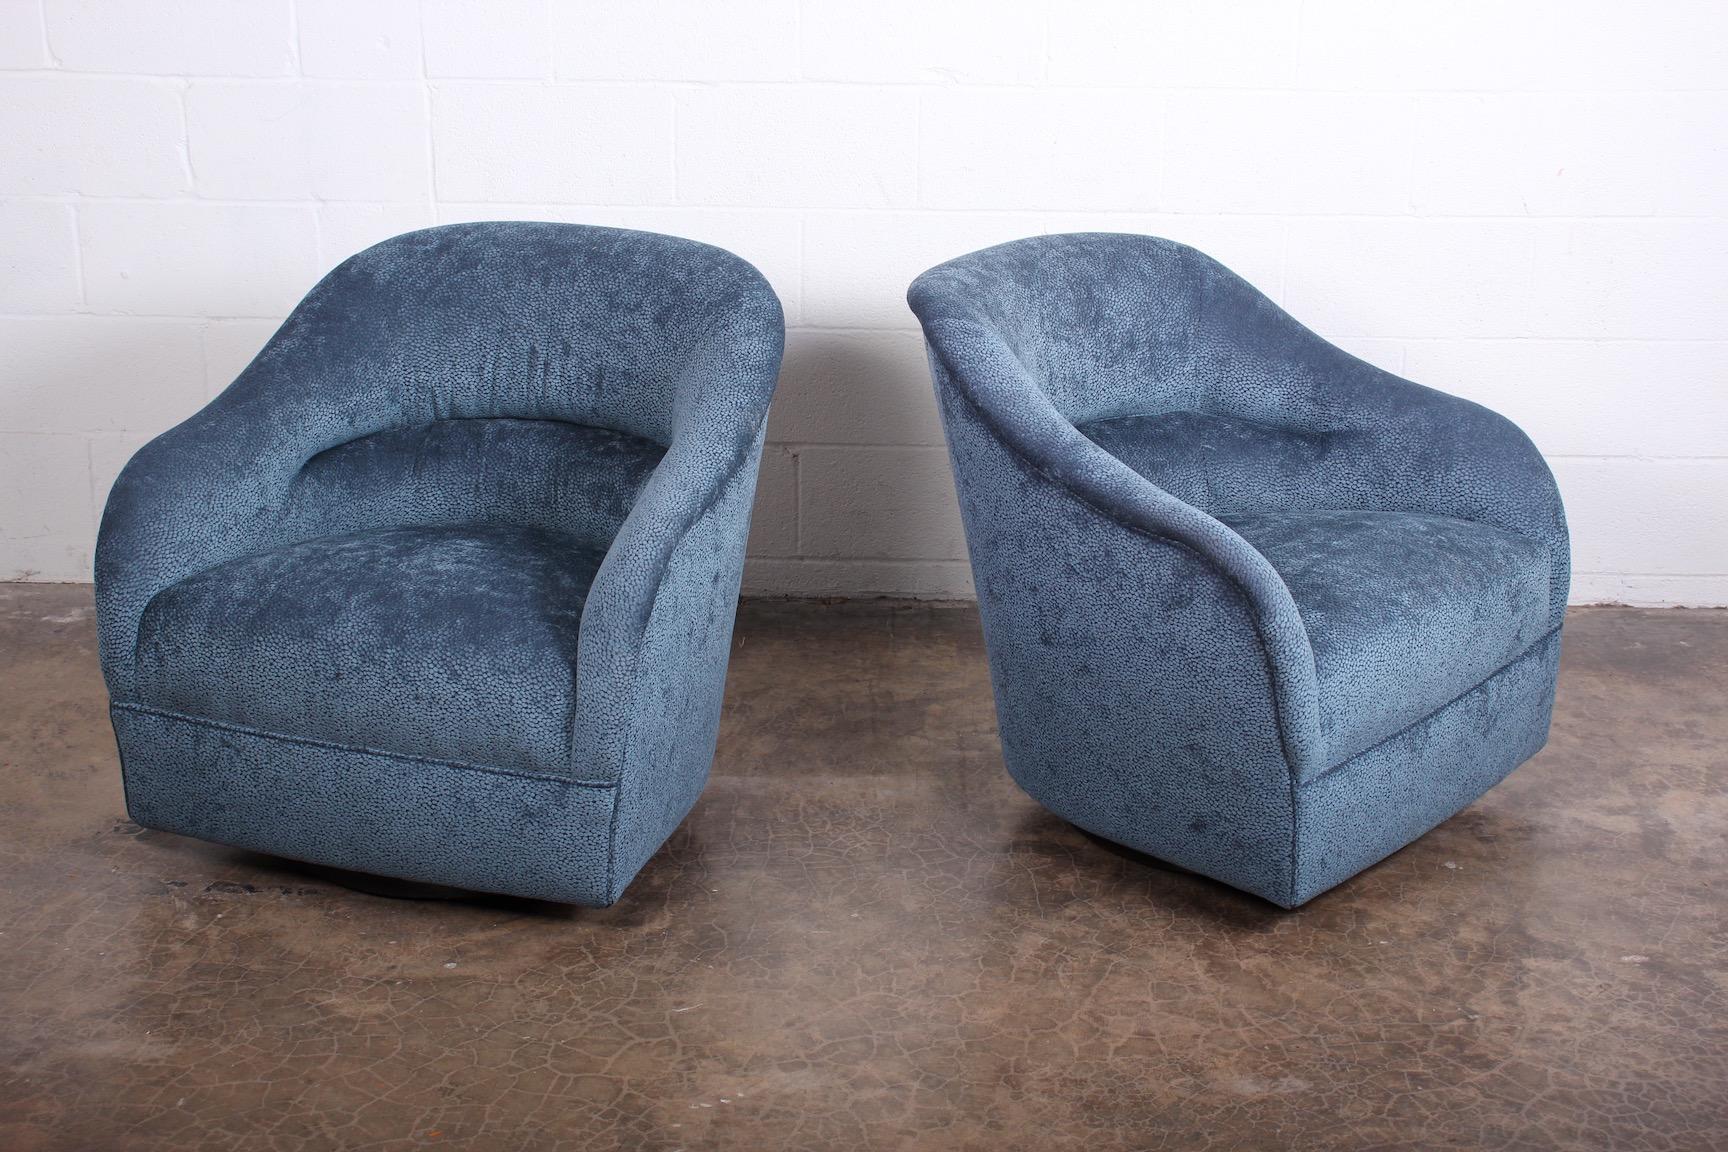 A pair of swivel chairs designed by Ward Bennett for Brickell.